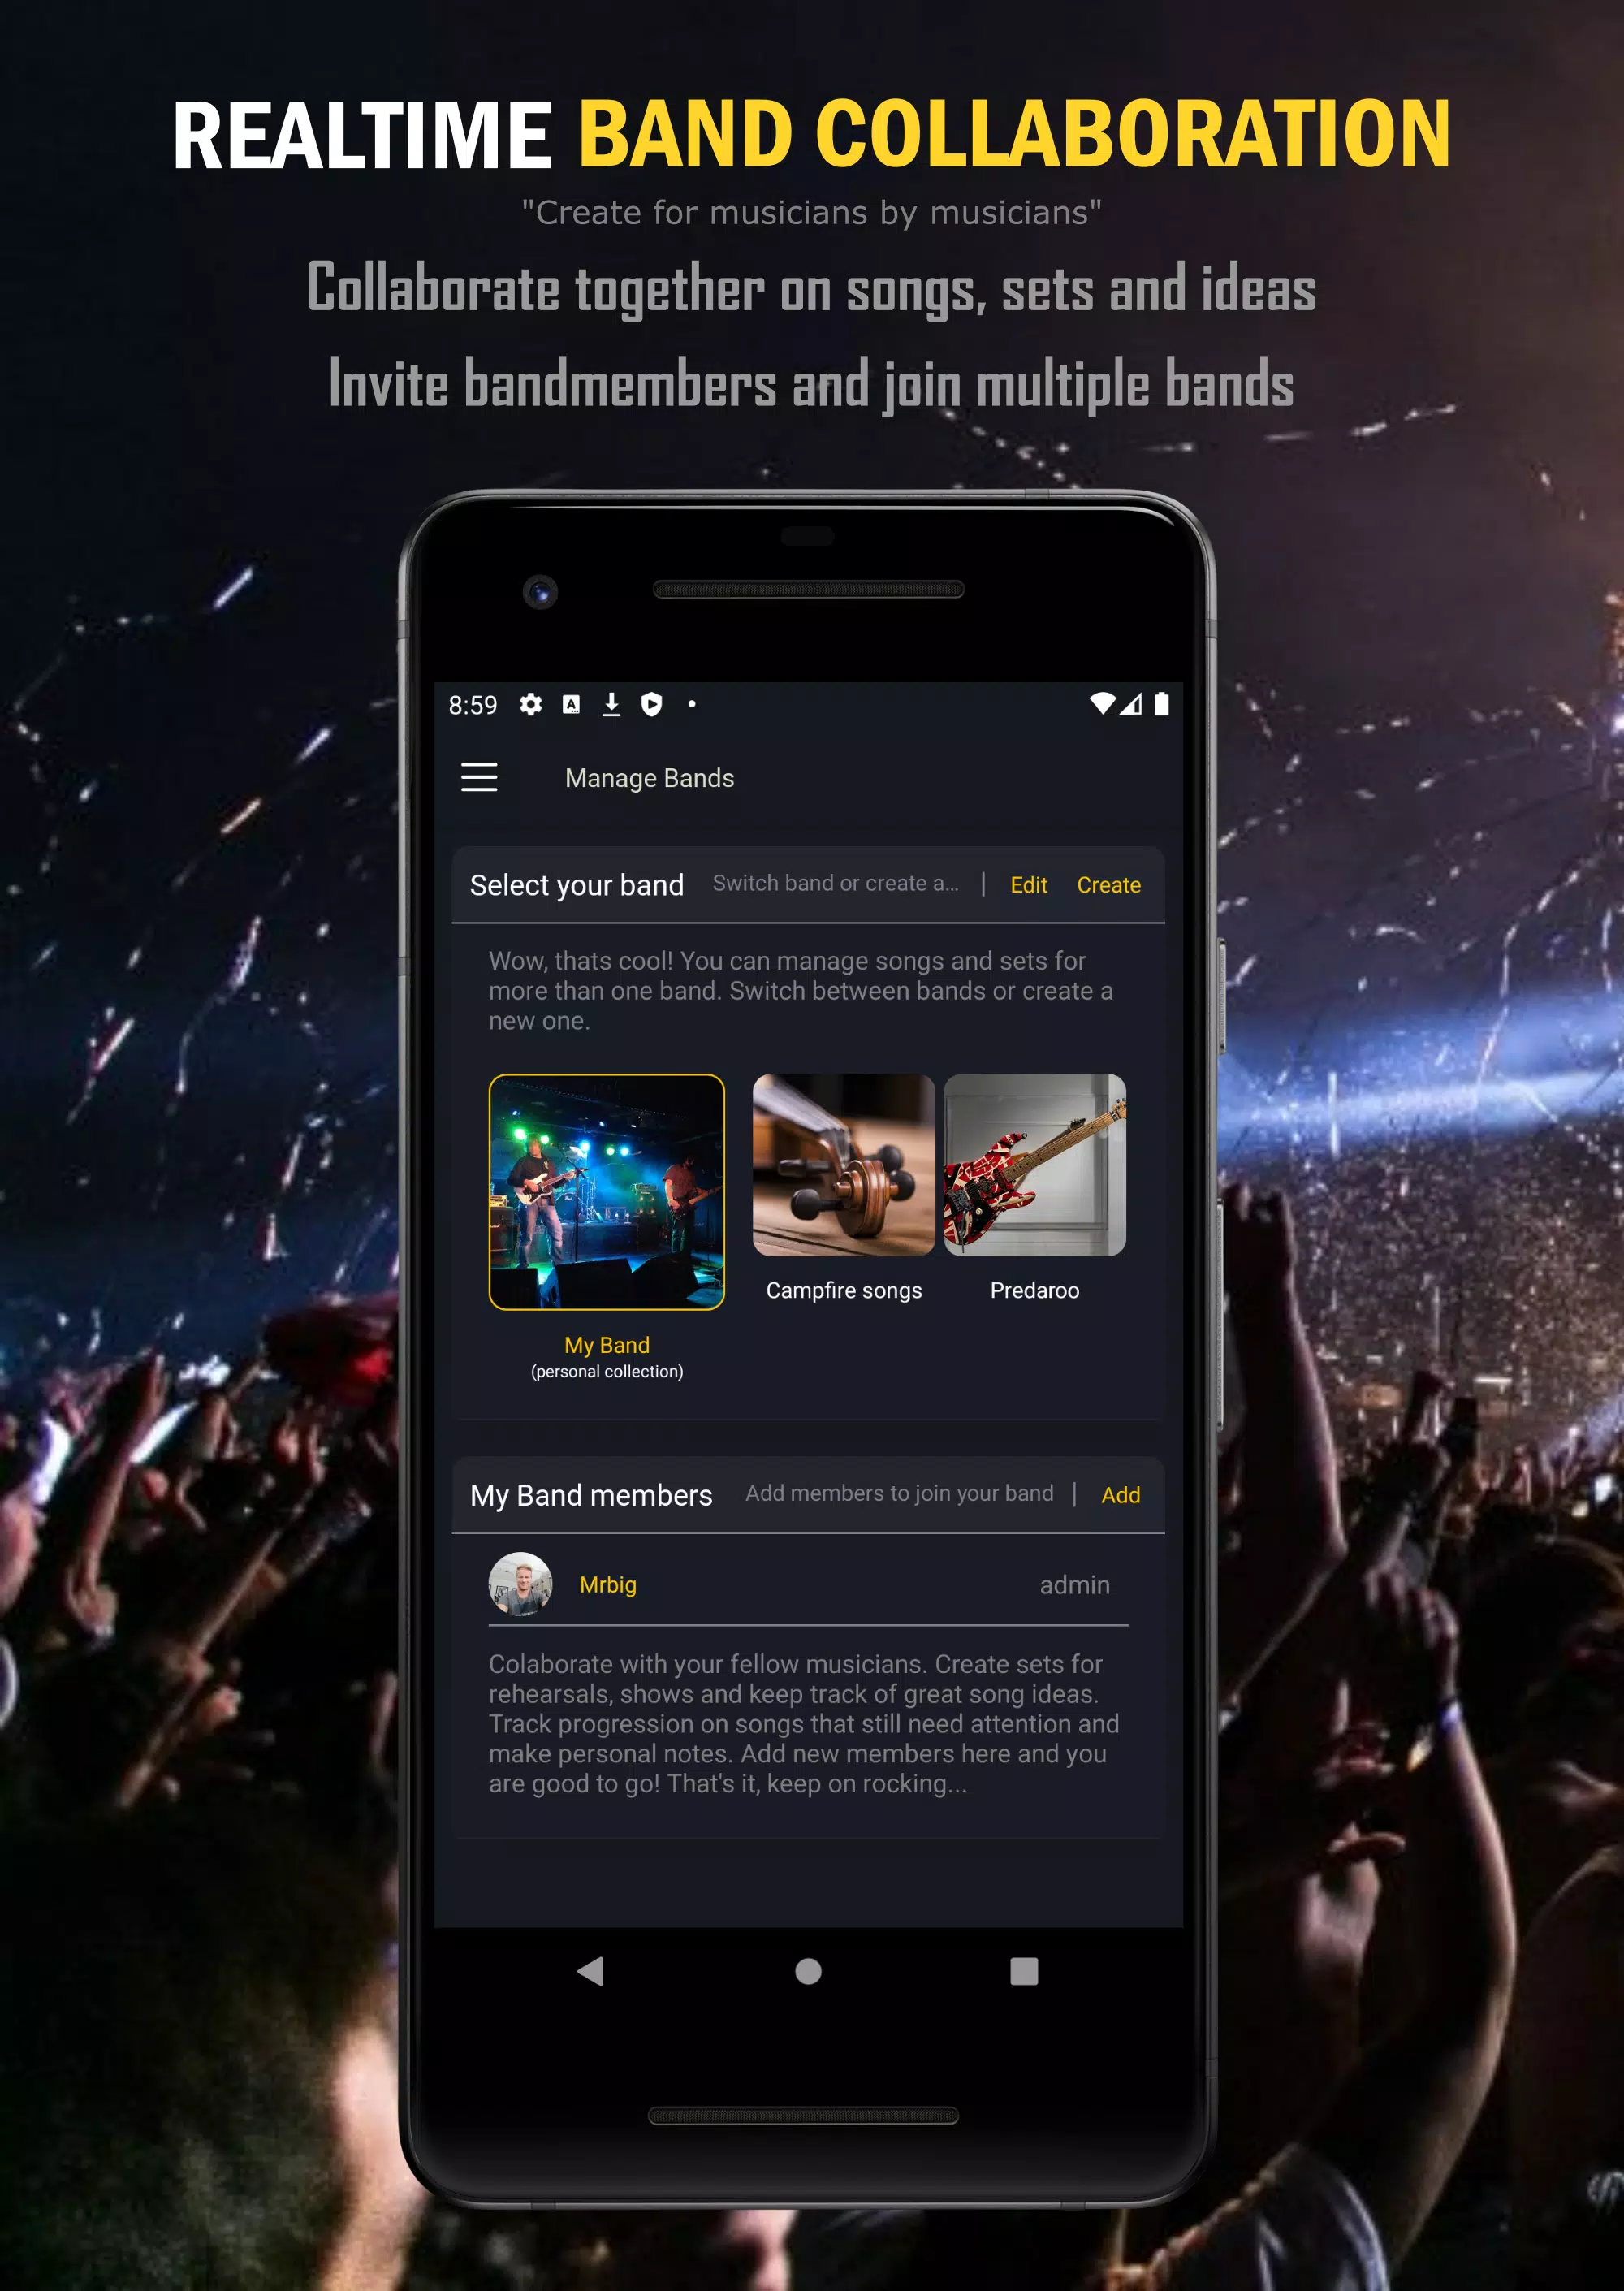 PlayScore2 needs hi-end camera for Android - Download